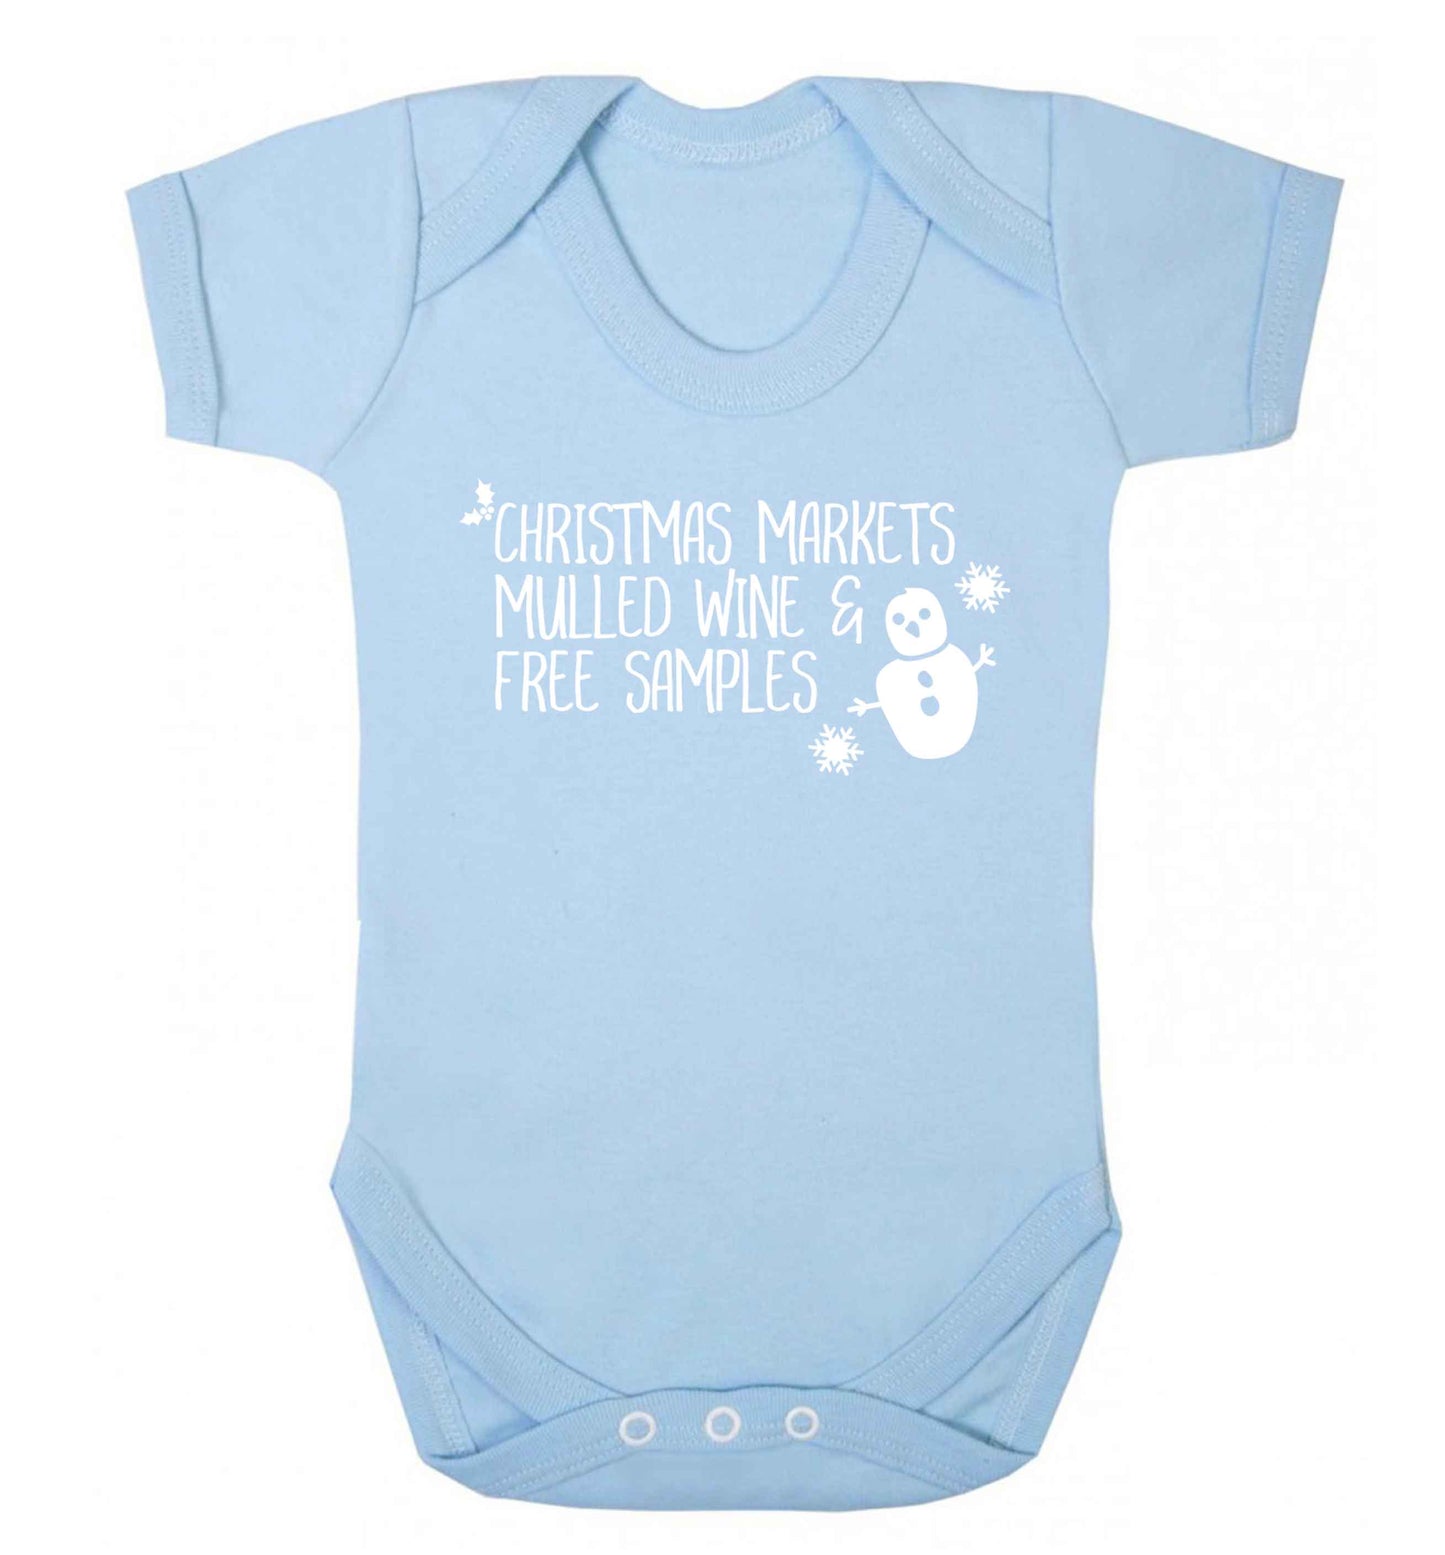 Christmas market mulled wine & free samples Baby Vest pale blue 18-24 months